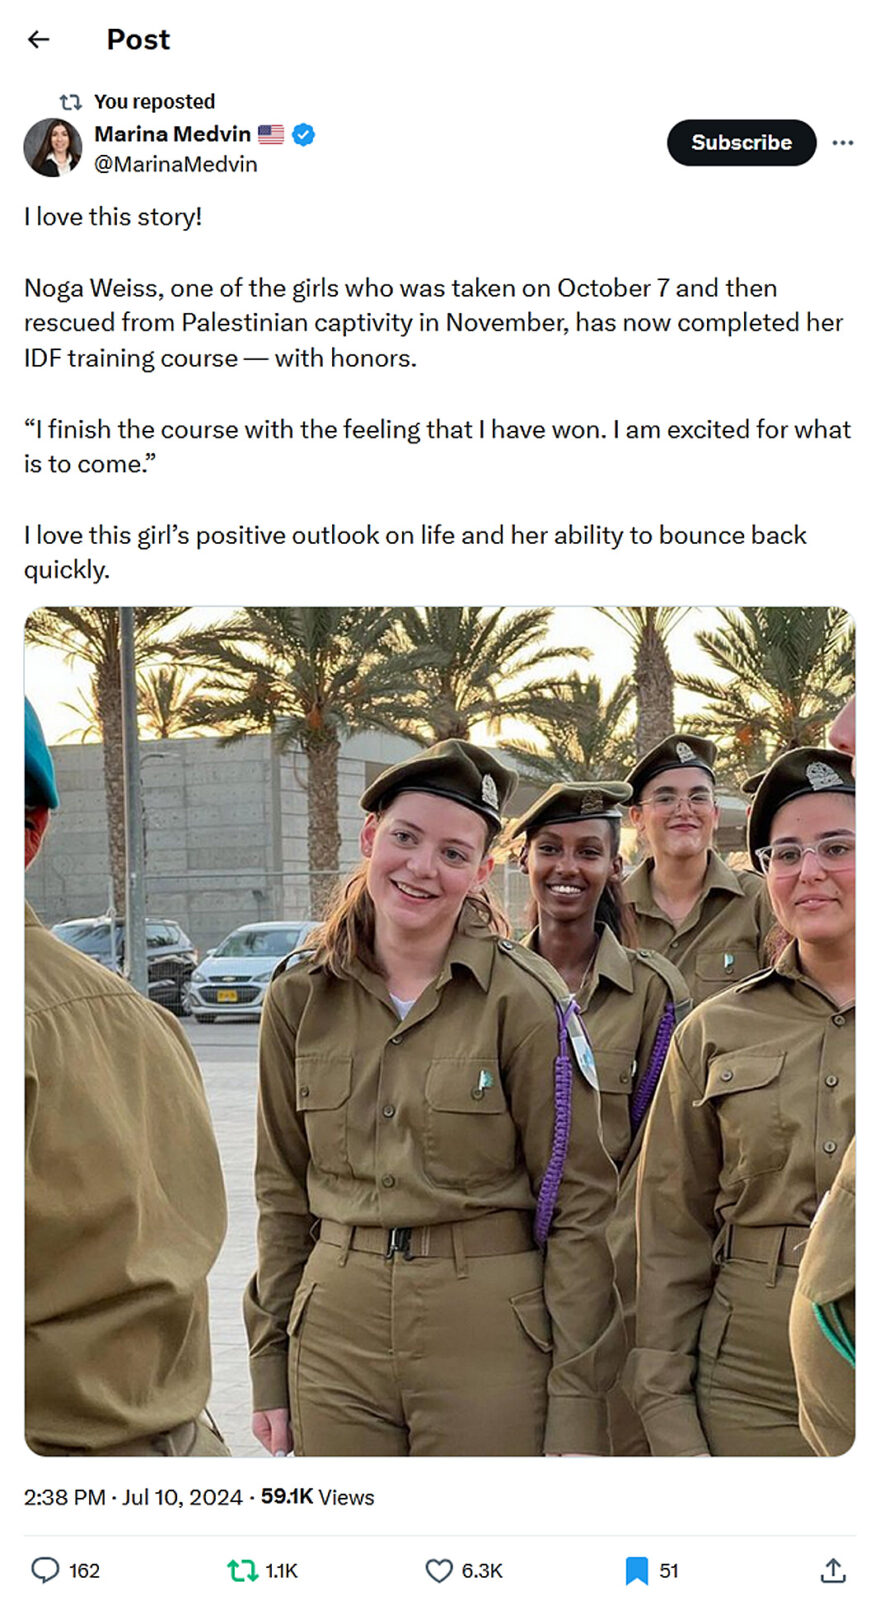 Marina Medvin-tweet-10July2024-Rescued from Palestinian captivity-completed IDF training course